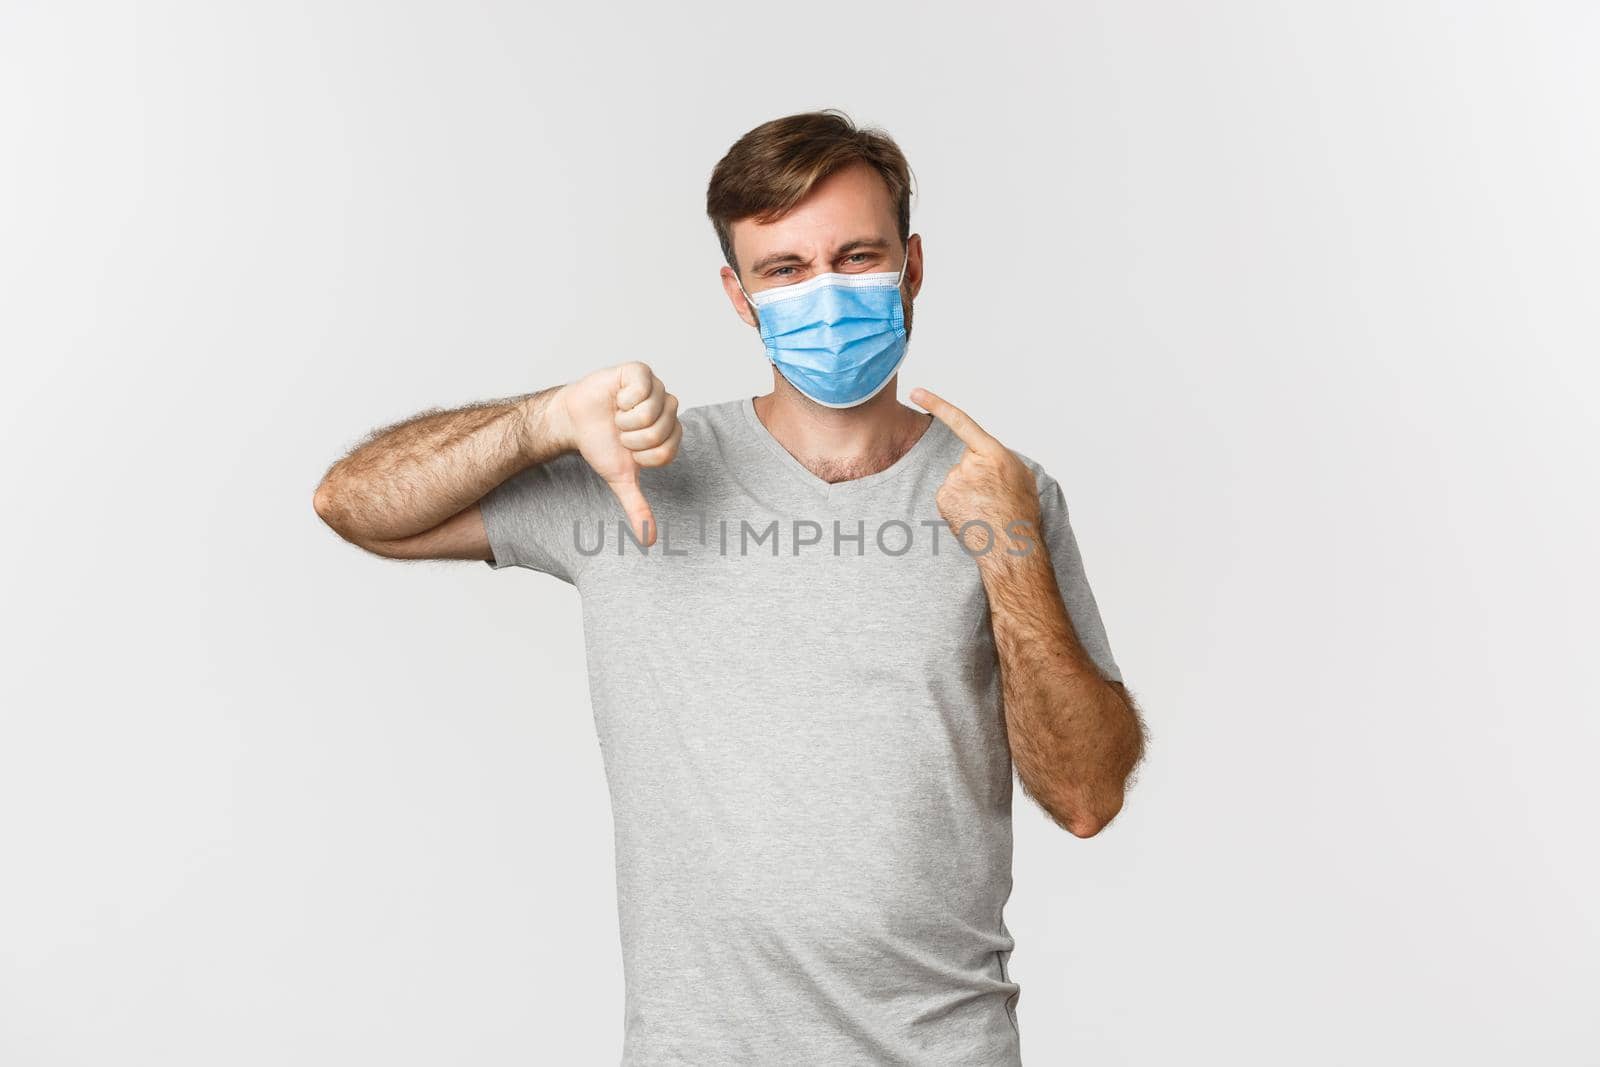 Concept of pandemic, covid-19 and social-distancing. Portrait of man hate wearing medical mask, complaining and showing thumbs-down, standing over white background.